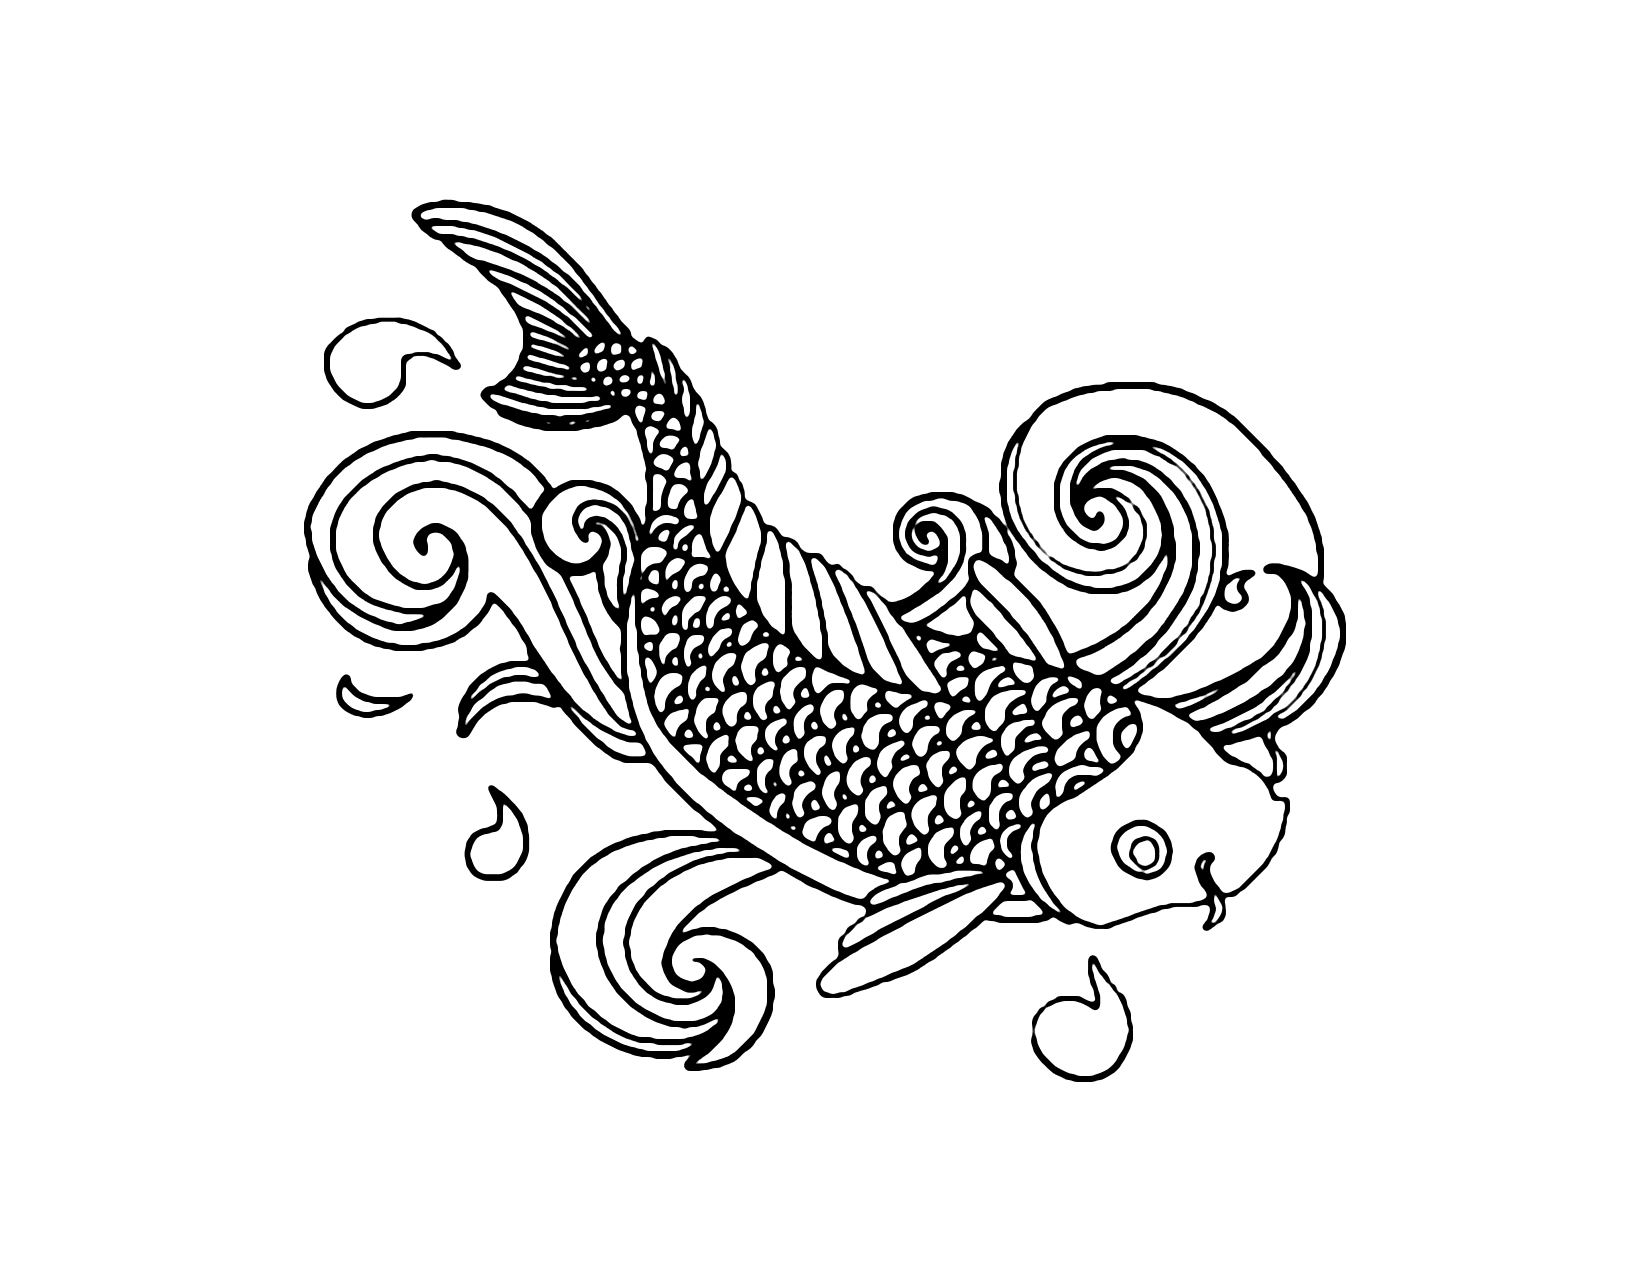 Asian Art Style Fish Coloring Page